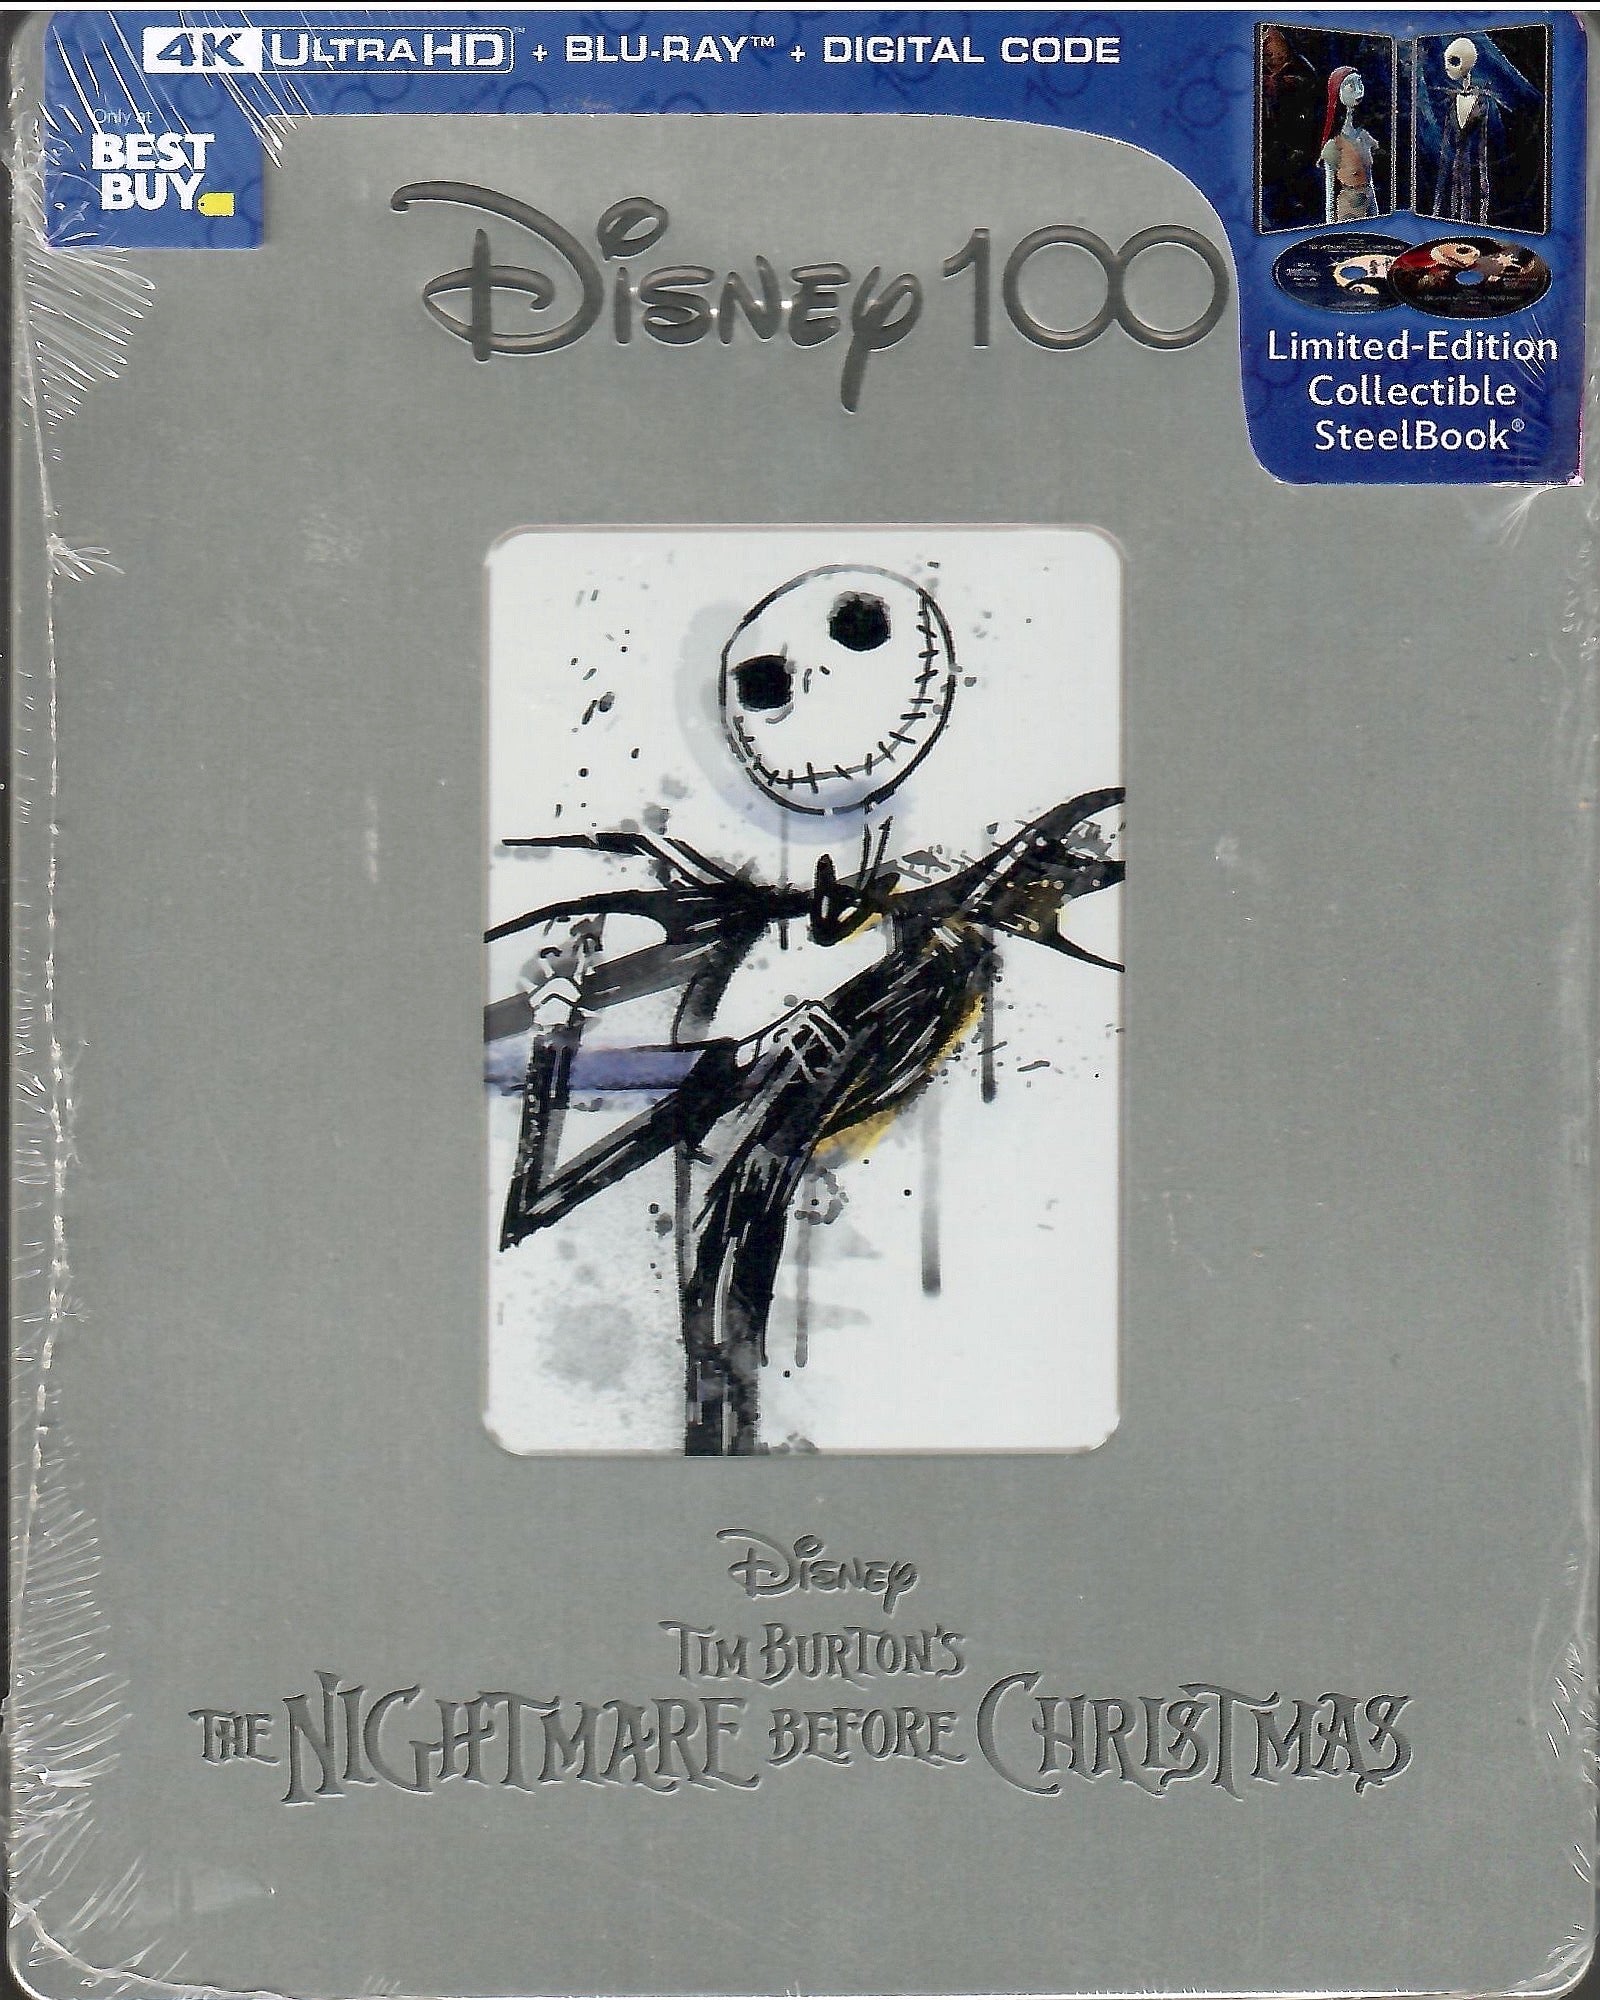 The Nightmare Before Christmas - Movies on Google Play